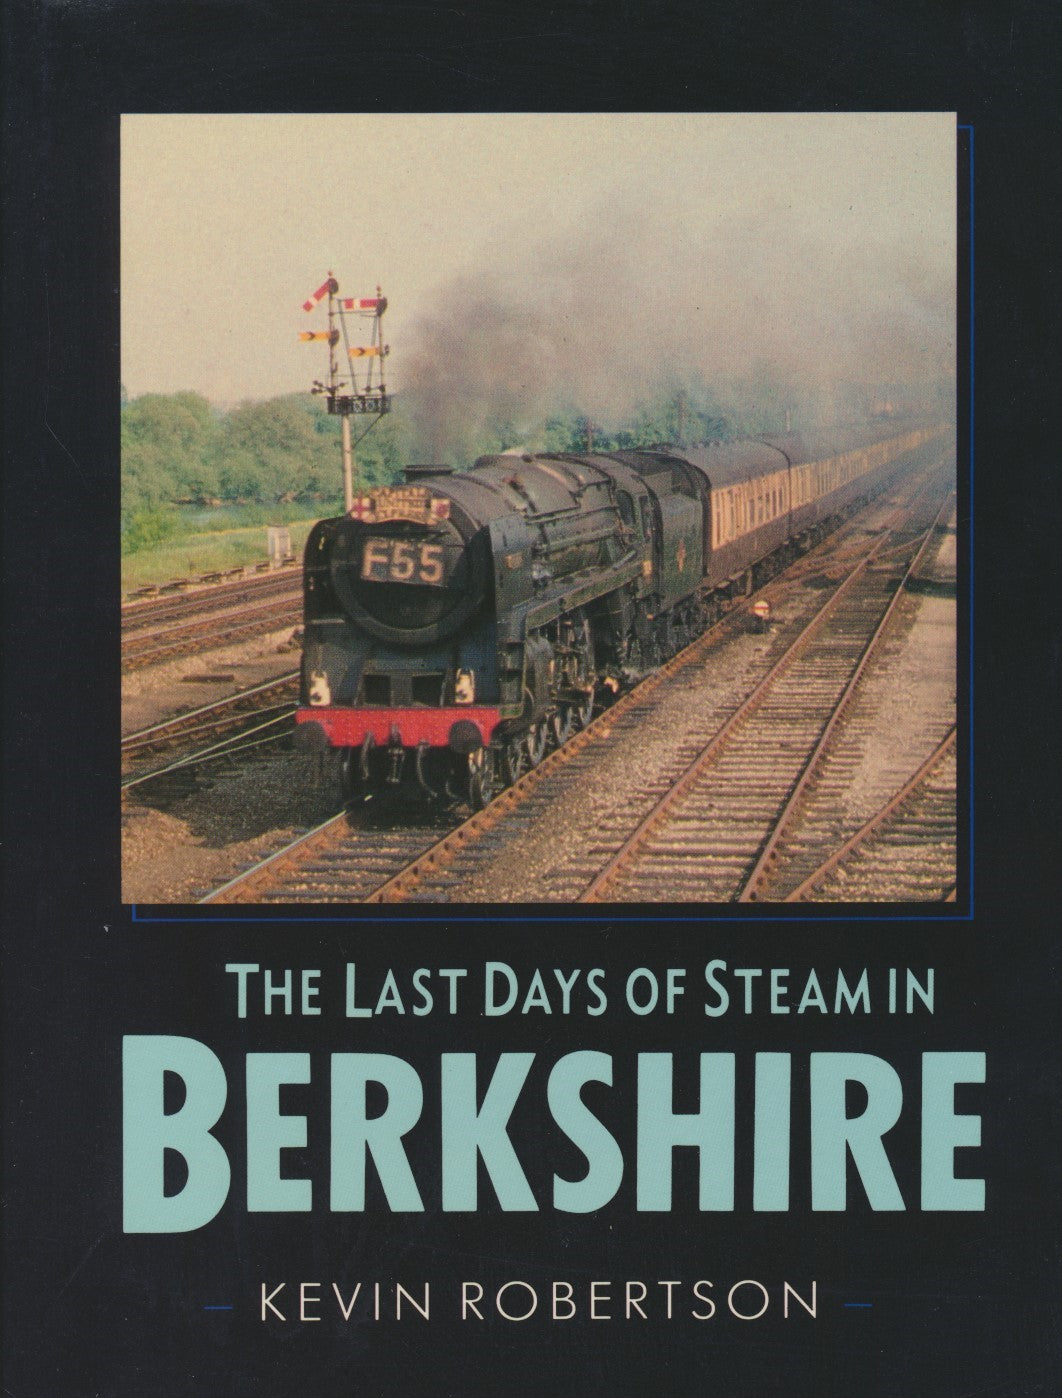 The Last Days of Steam in Berkshire